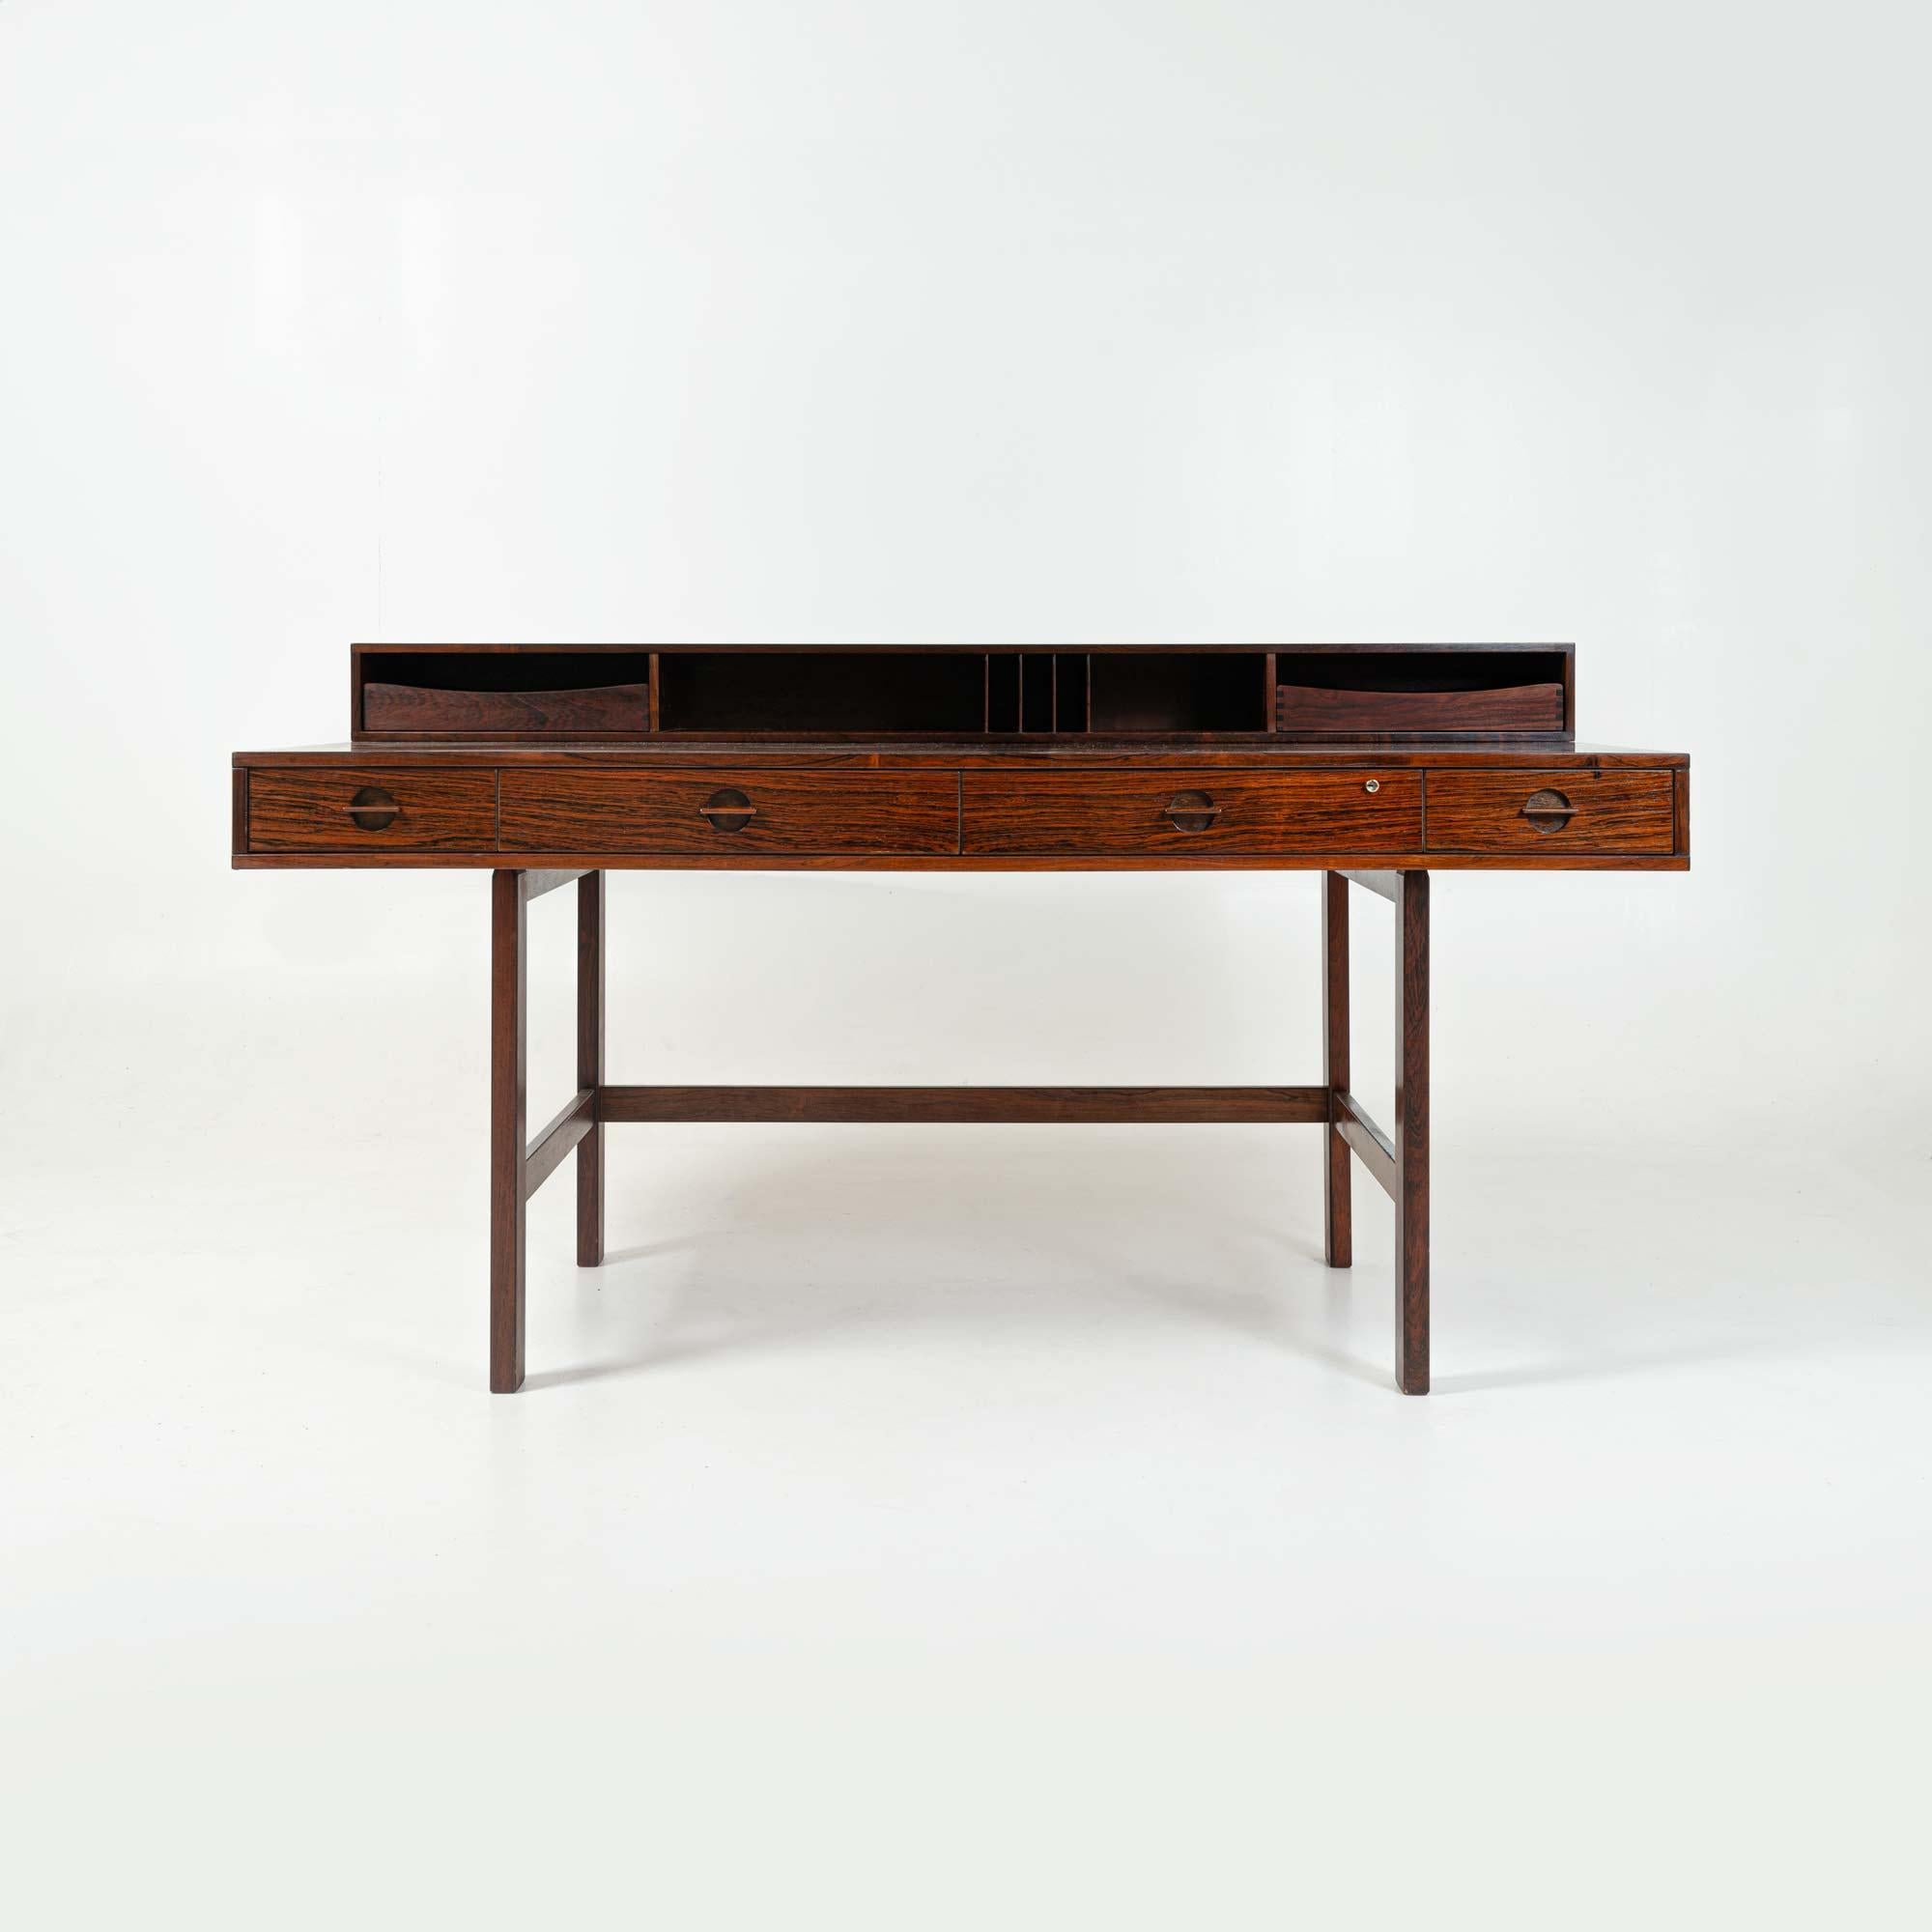 Extremely rare Flip top partner's desk by Peter Lovig Nielsen in rosewood with brass fittings. Retains original trays for the upper level cubbies. The top shelf of the desk flips down to extend the work surface allowing it to be used as a partner’s